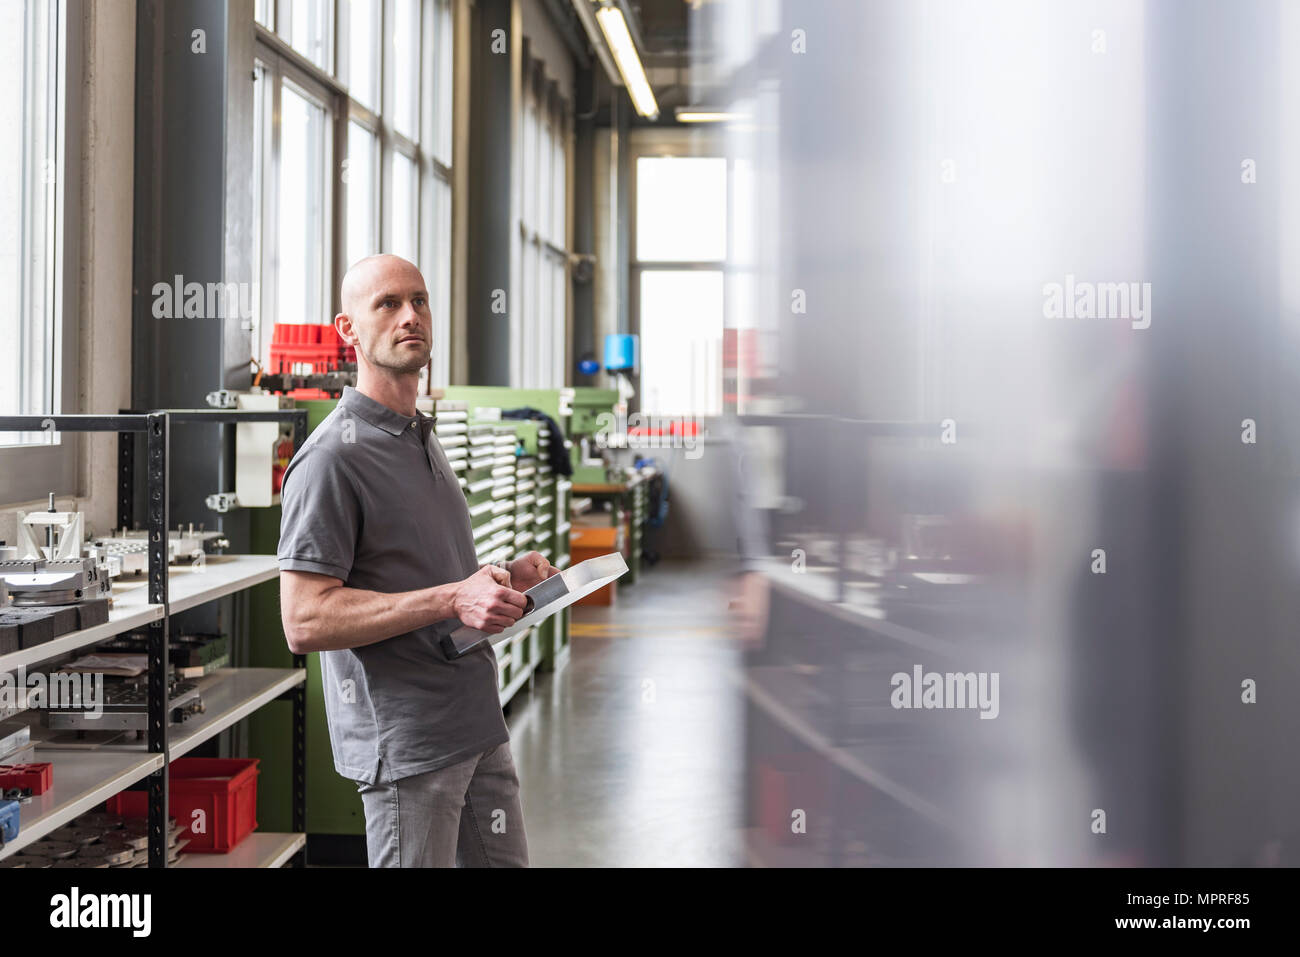 Man standing in modern factory holding product Stock Photo